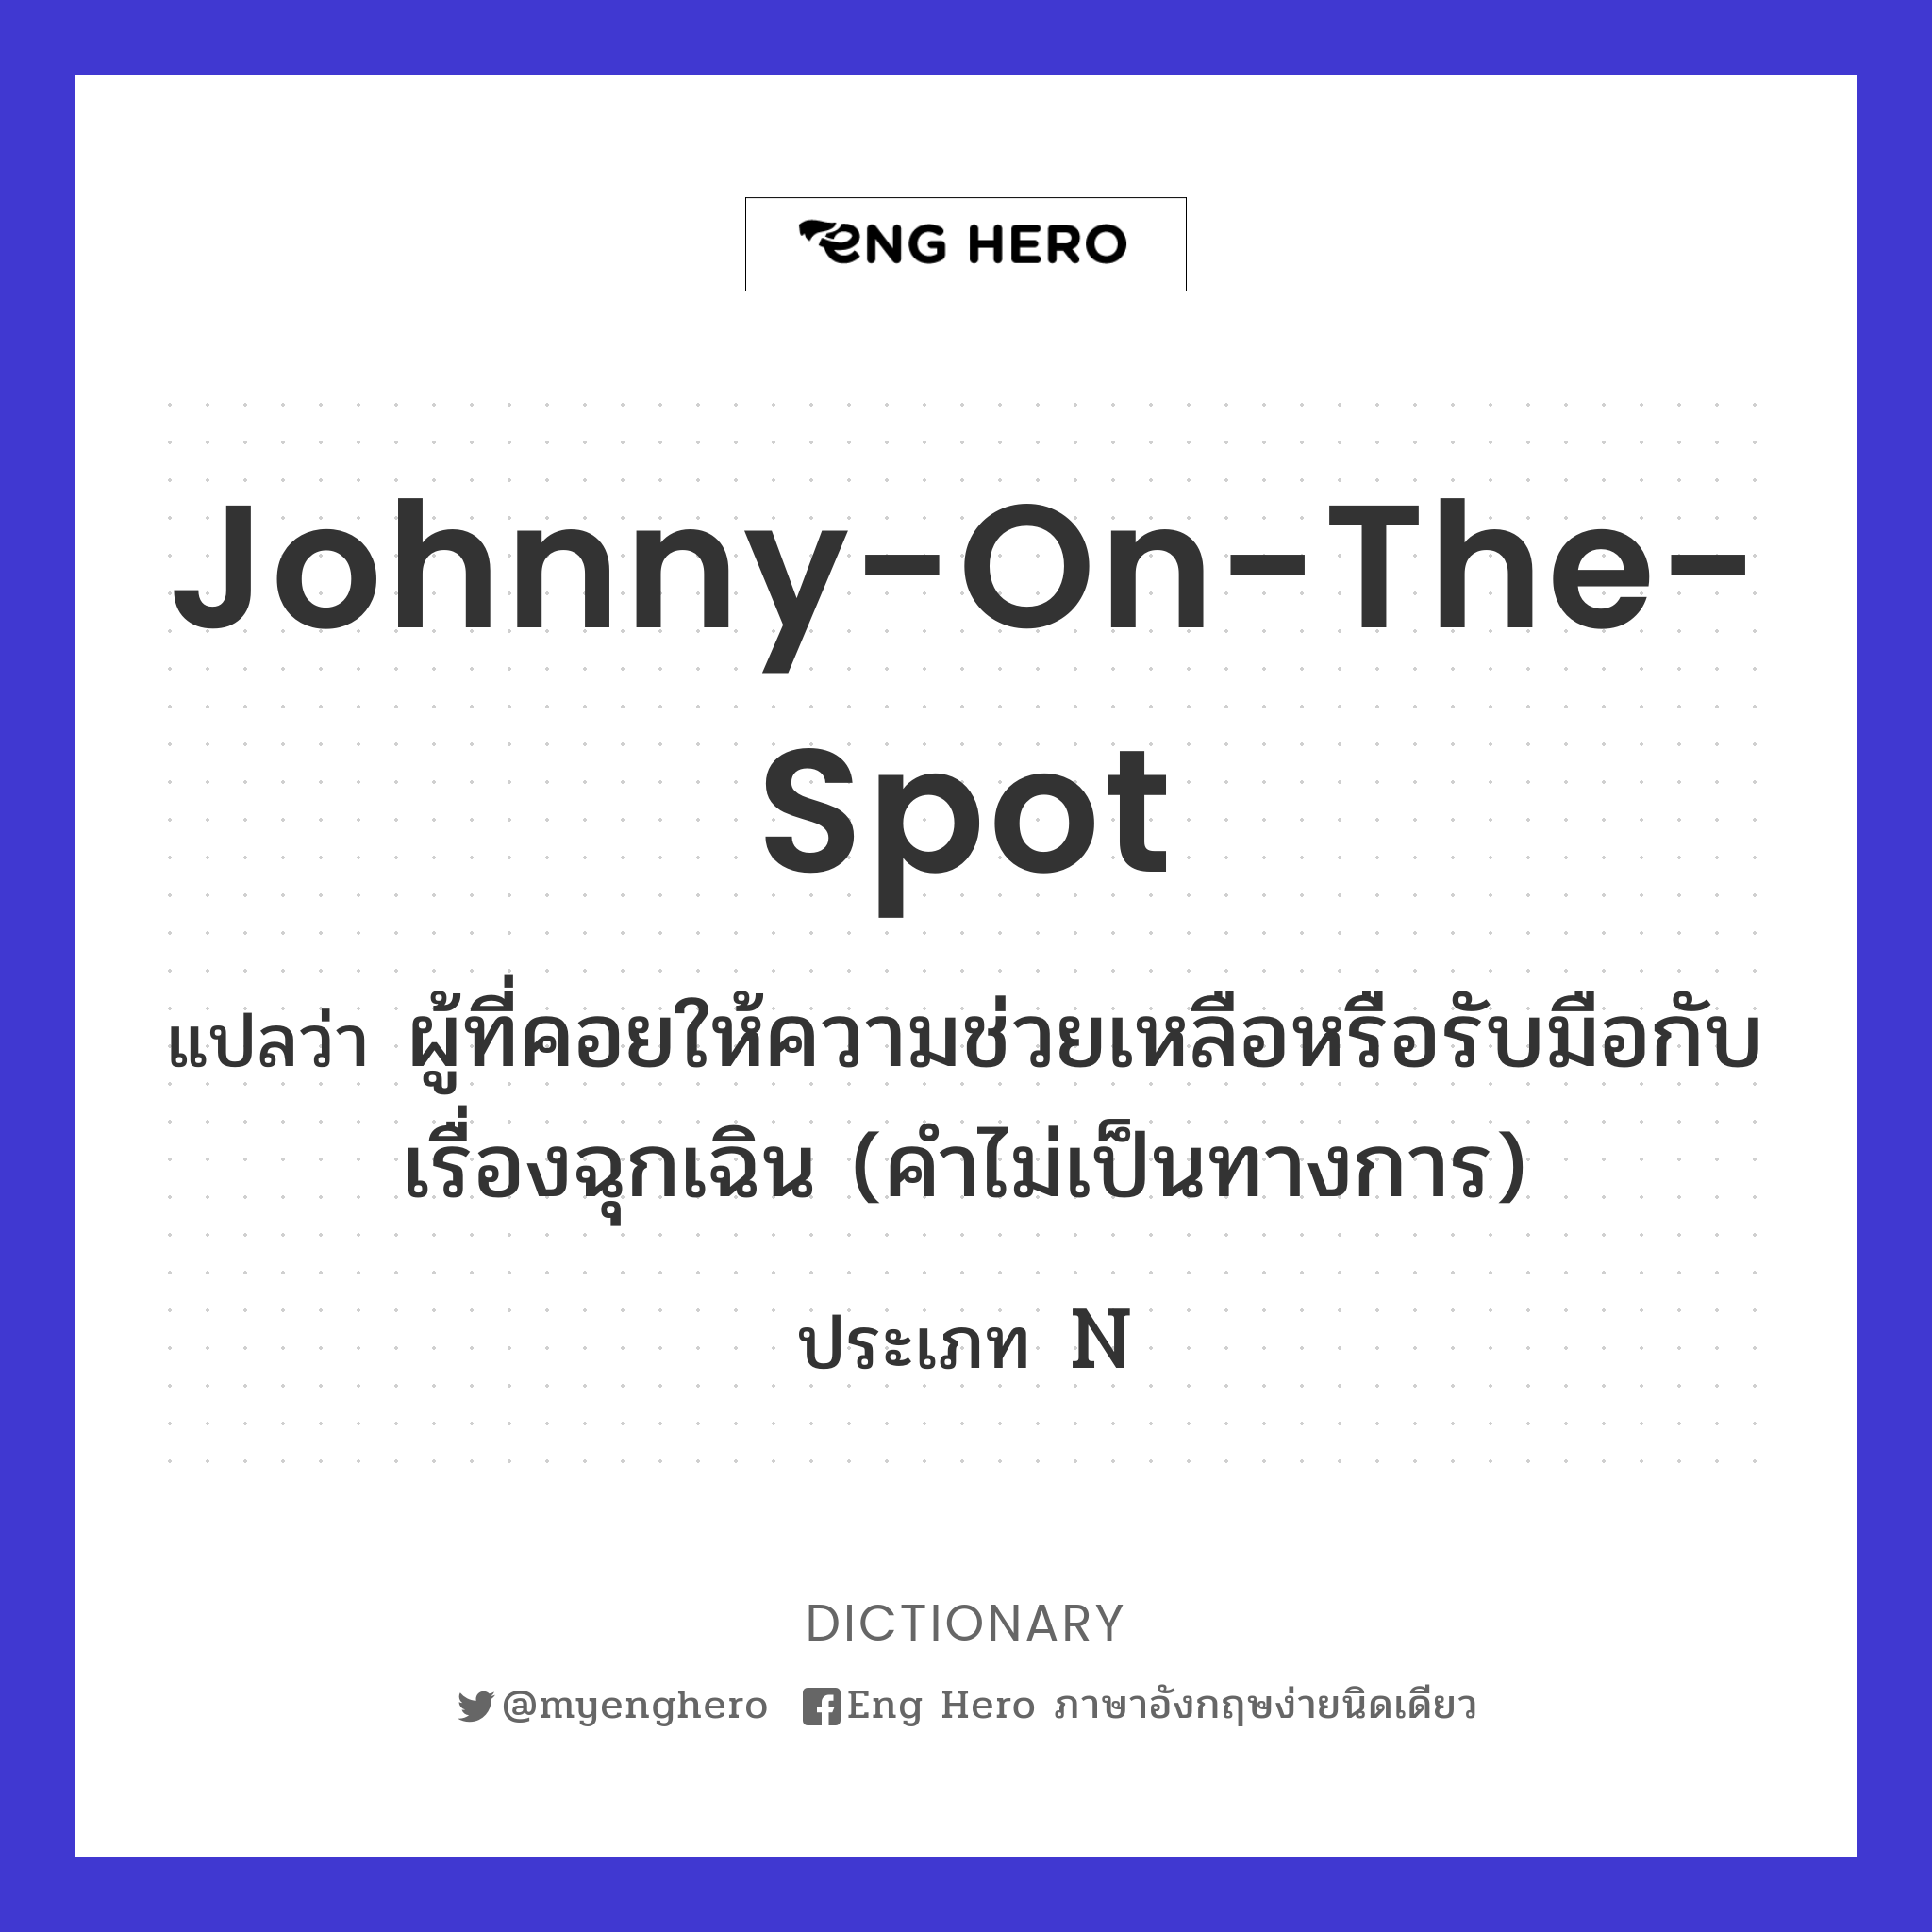 Johnny-on-the-spot